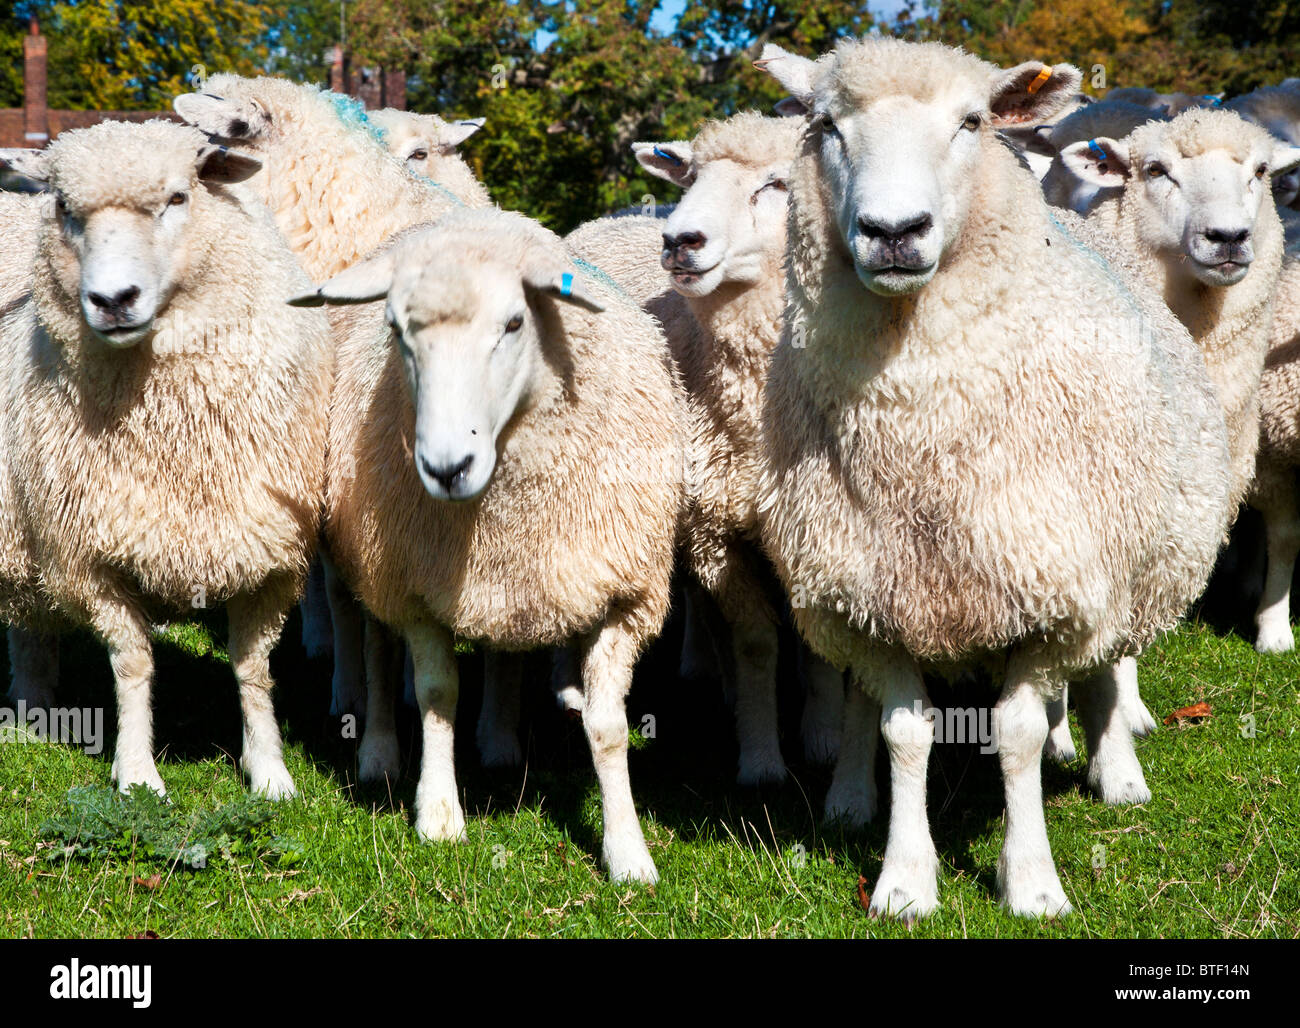 A flock of Romney sheep Stock Photo